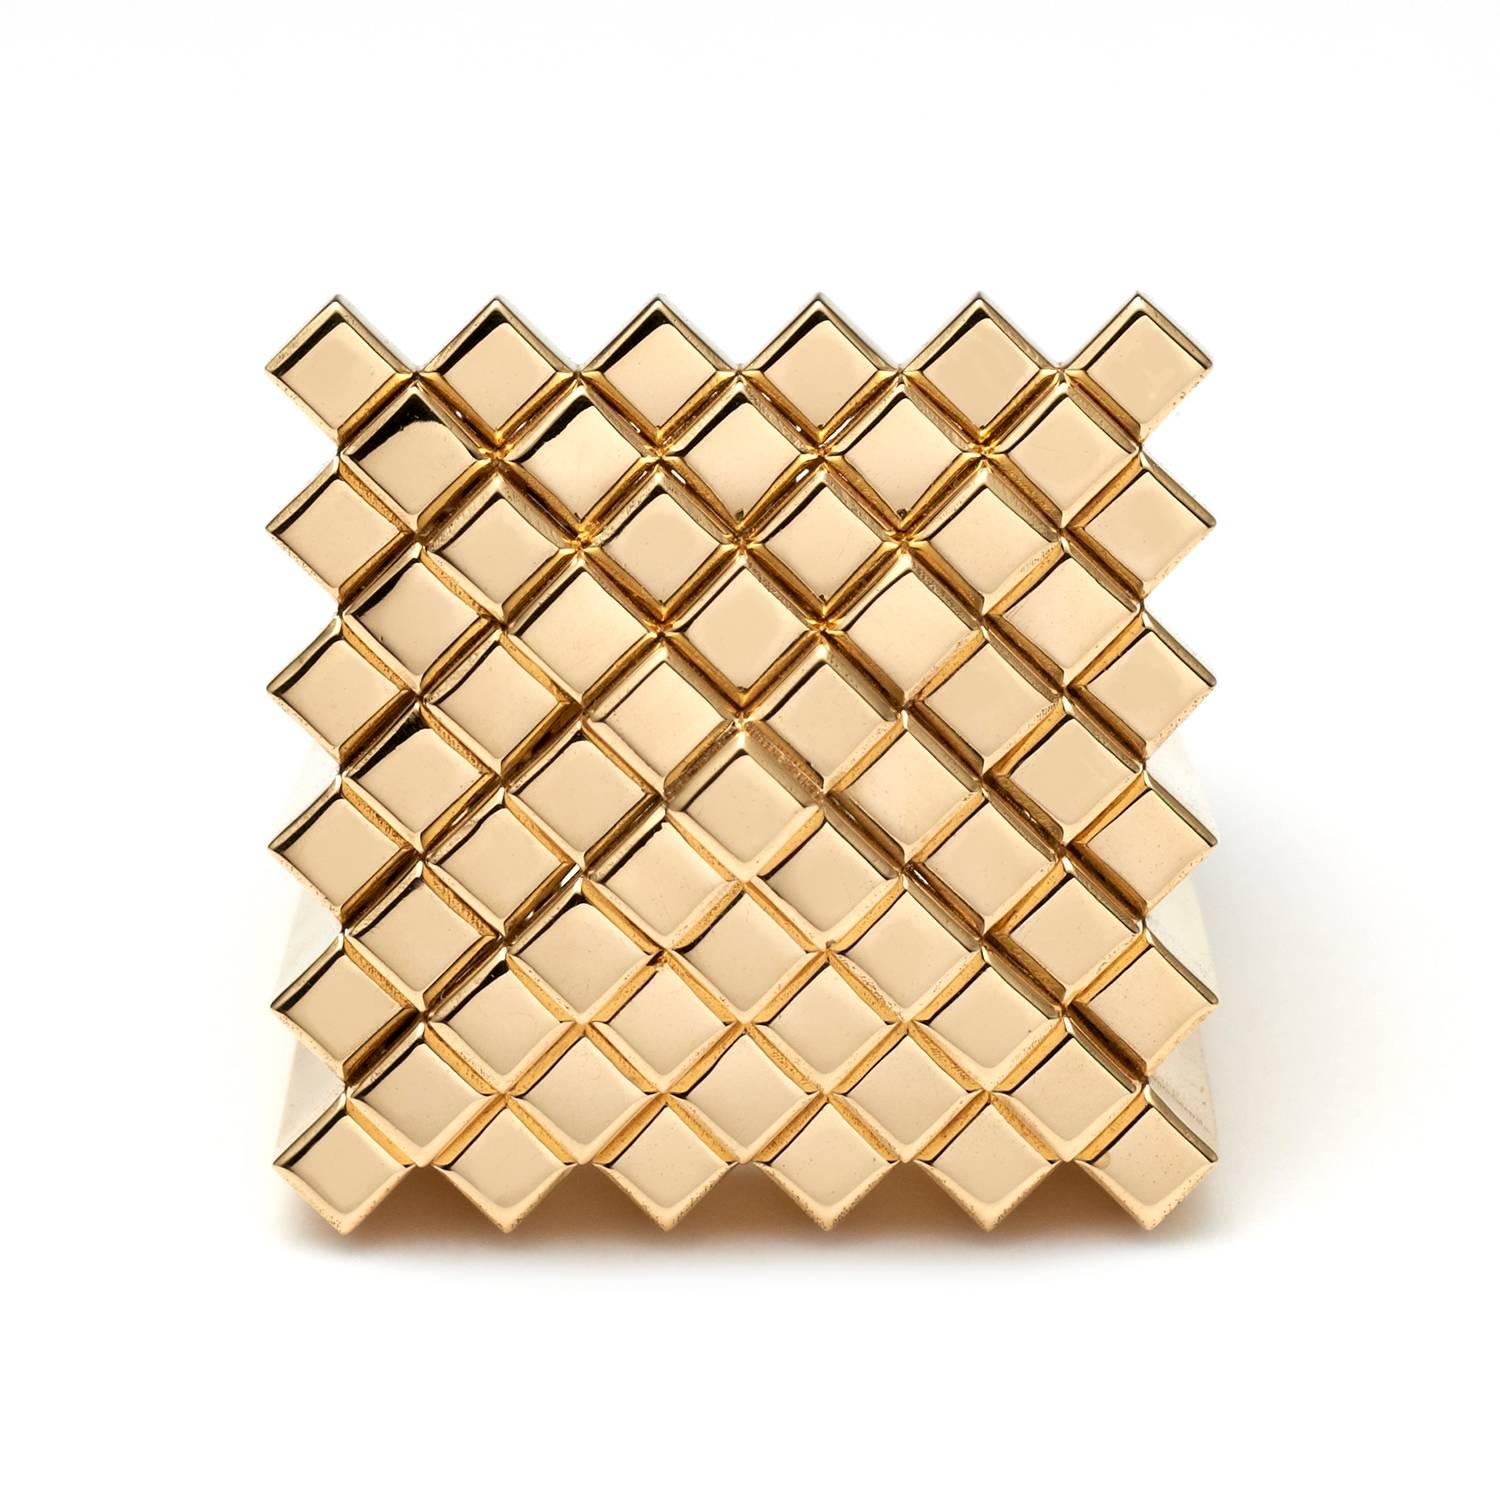 Polished 18ct. yellow gold "Pyramid Pixel" ring by Francesca Grima

French Size 53  UK Size M  U.S. Size 6 1/4

Signed Francesca Grima

About Francesca Grima 
Born into a family that has a long tradition in fine jewellery – her great-great